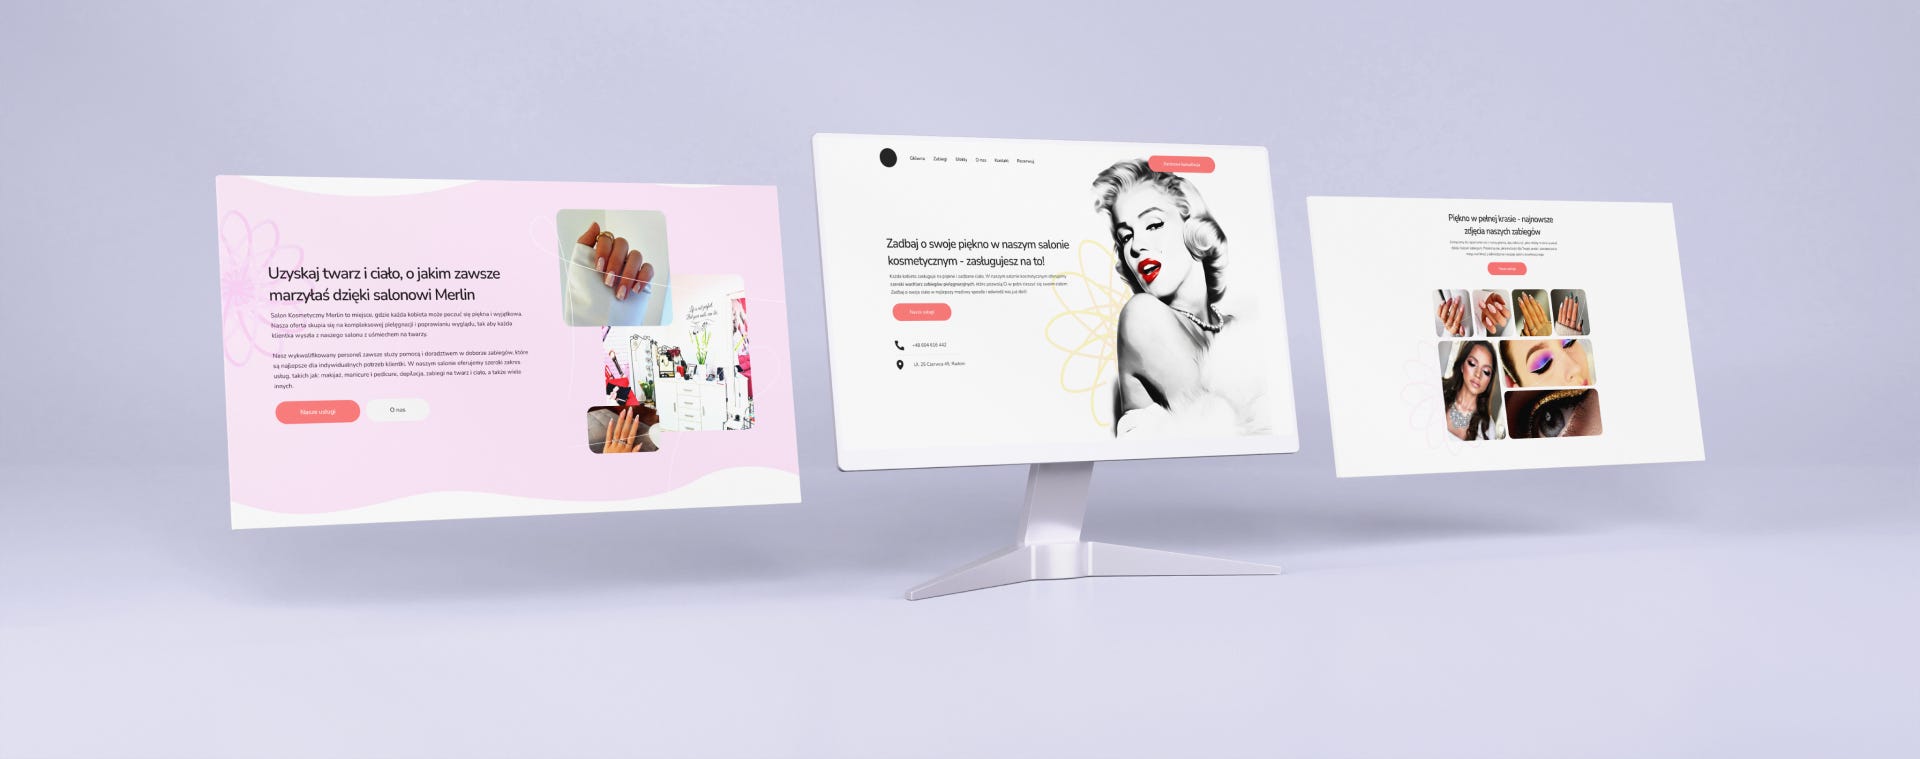 How We've Conquered a Local Market — Beauty Studio Case Study | by Dominik  Lyko | UX Planet